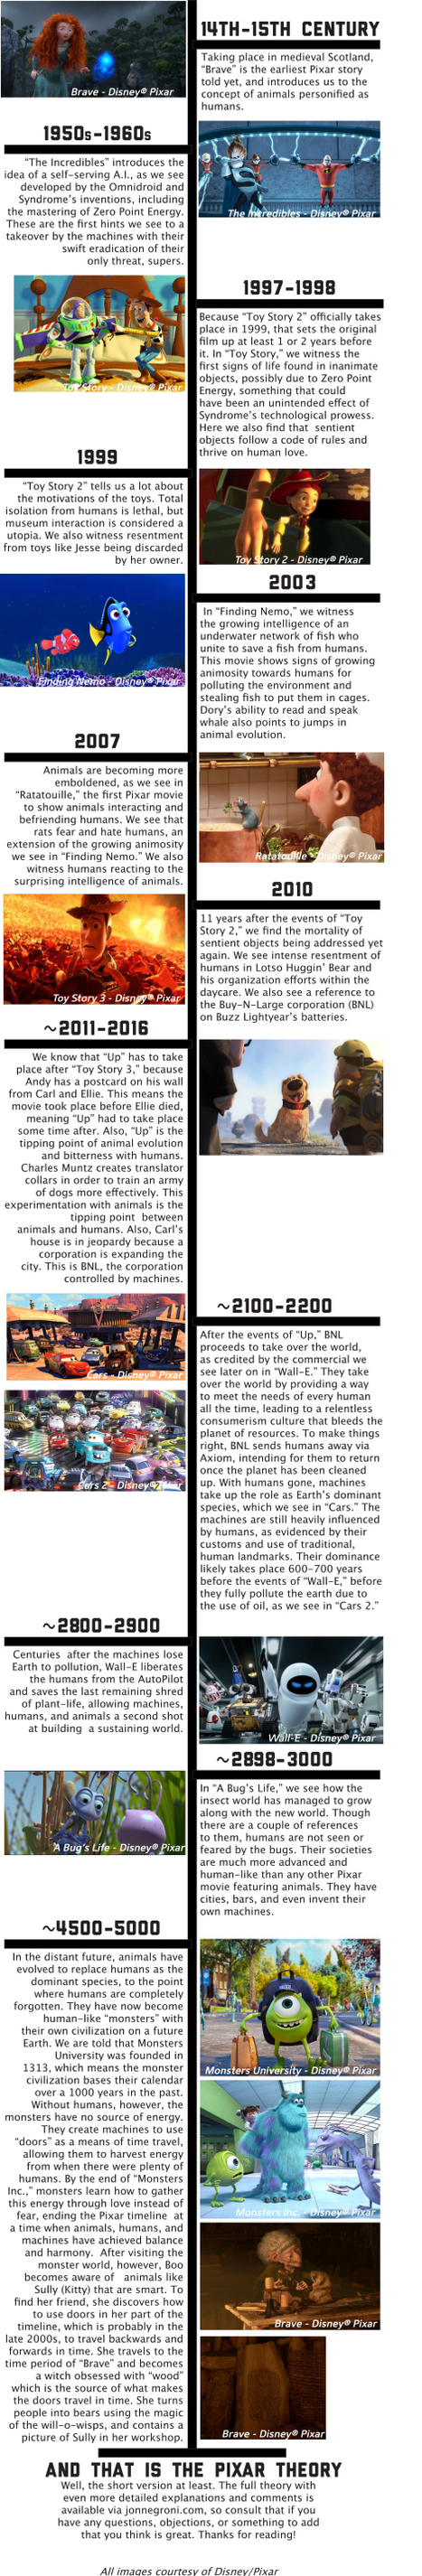 The Pixar Theory Timeline | Transmedia: Storytelling for the Digital Age | Scoop.it